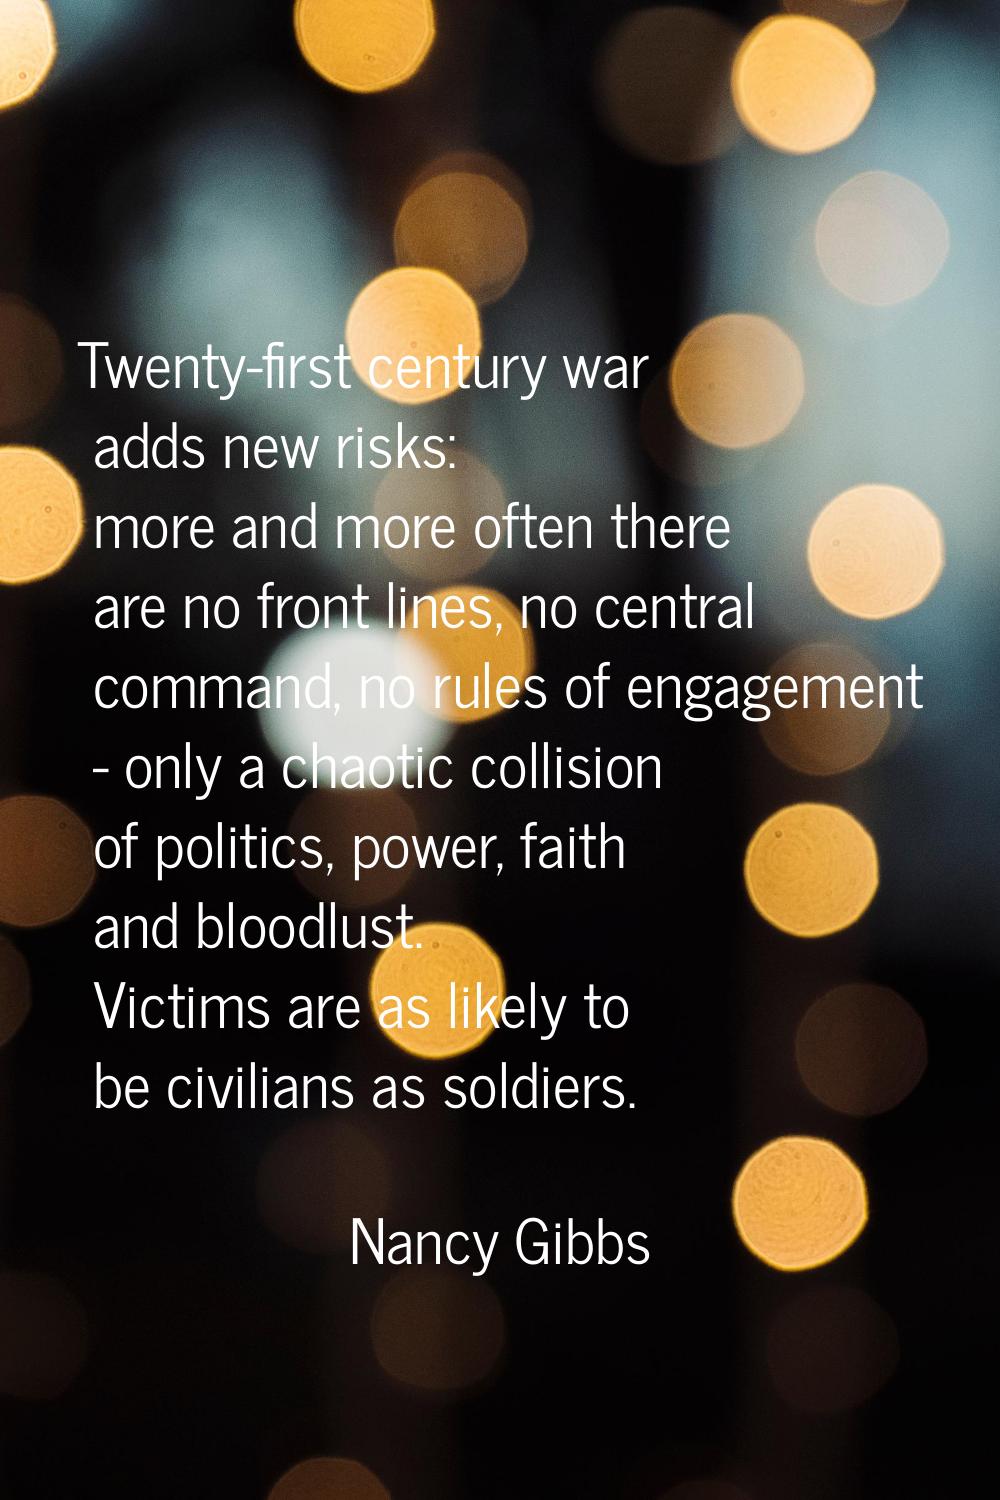 Twenty-first century war adds new risks: more and more often there are no front lines, no central c